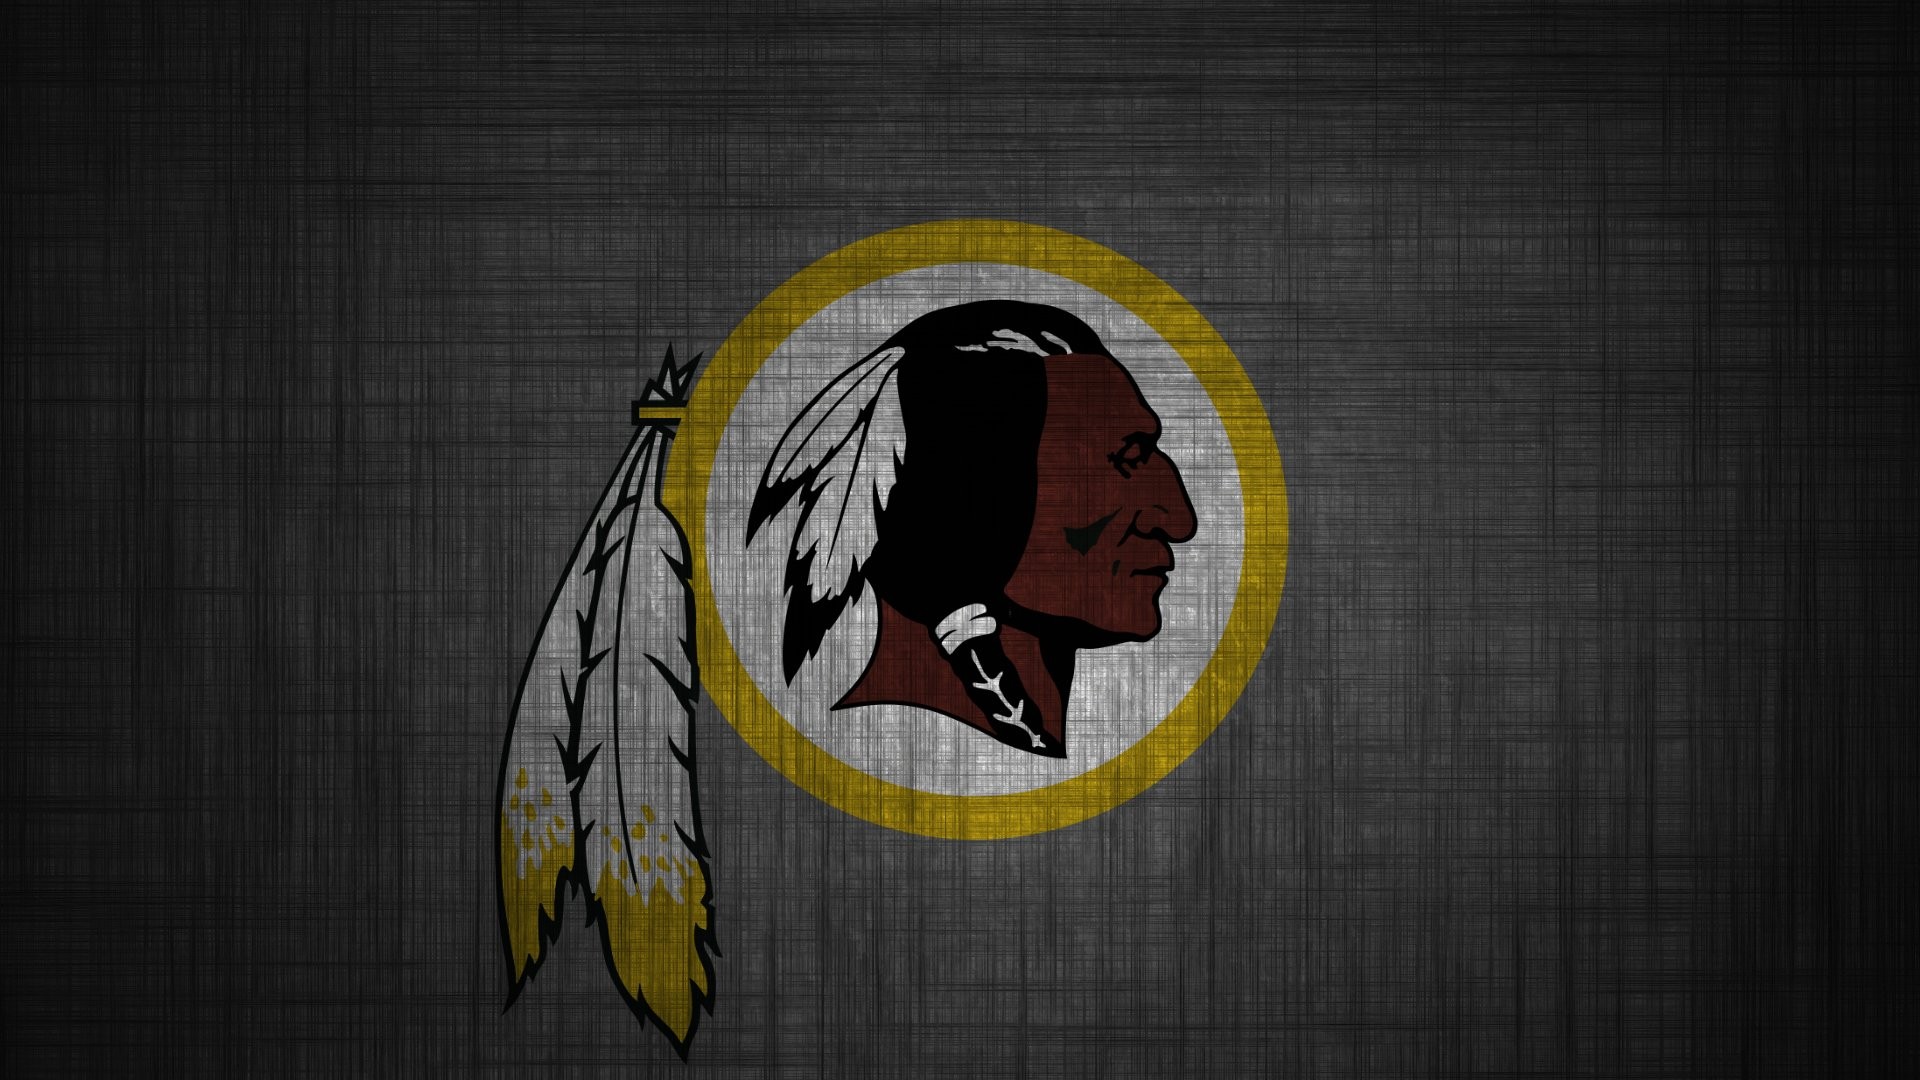 HD Backgrounds Washington Redskins with high-resolution 1920x1080 pixel. You can use this wallpaper for your Mac or Windows Desktop Background, iPhone, Android or Tablet and another Smartphone device